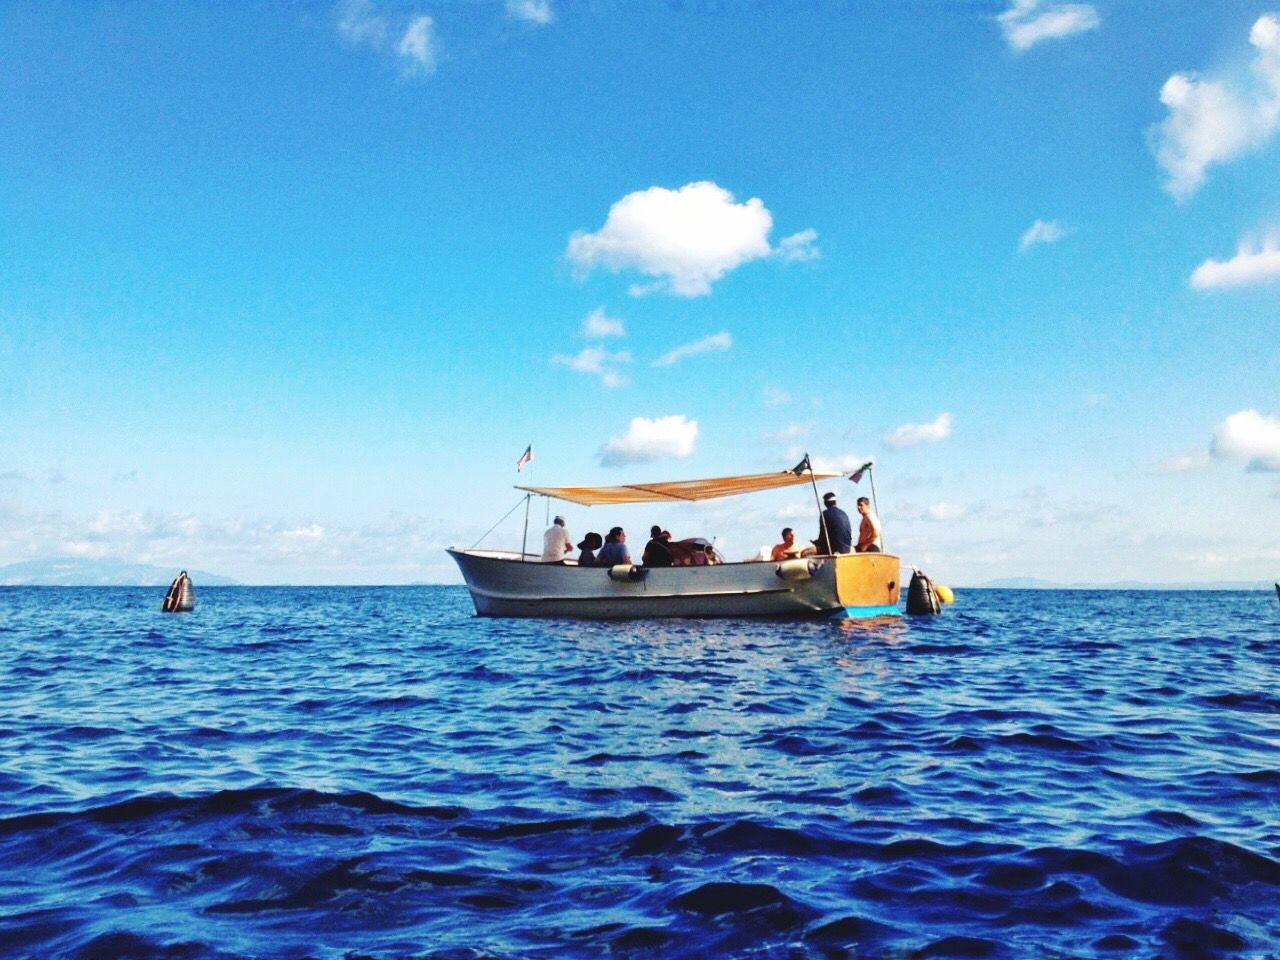 People on boat sailing in sea against sky